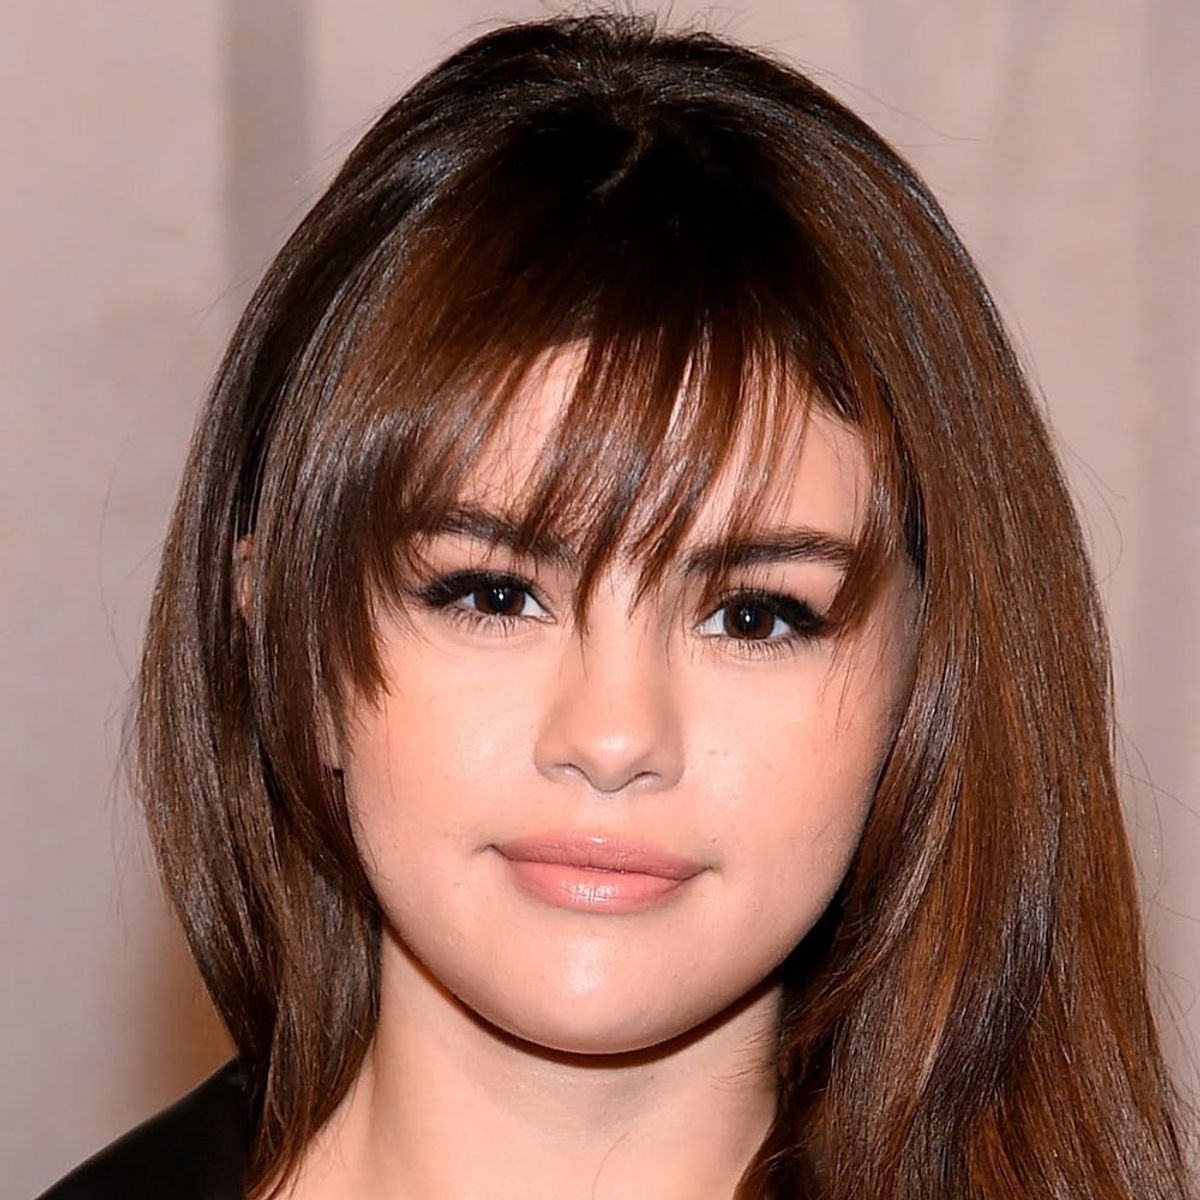 Selena Gomez and Her Pals Get the Sweetest Matching Tattoos